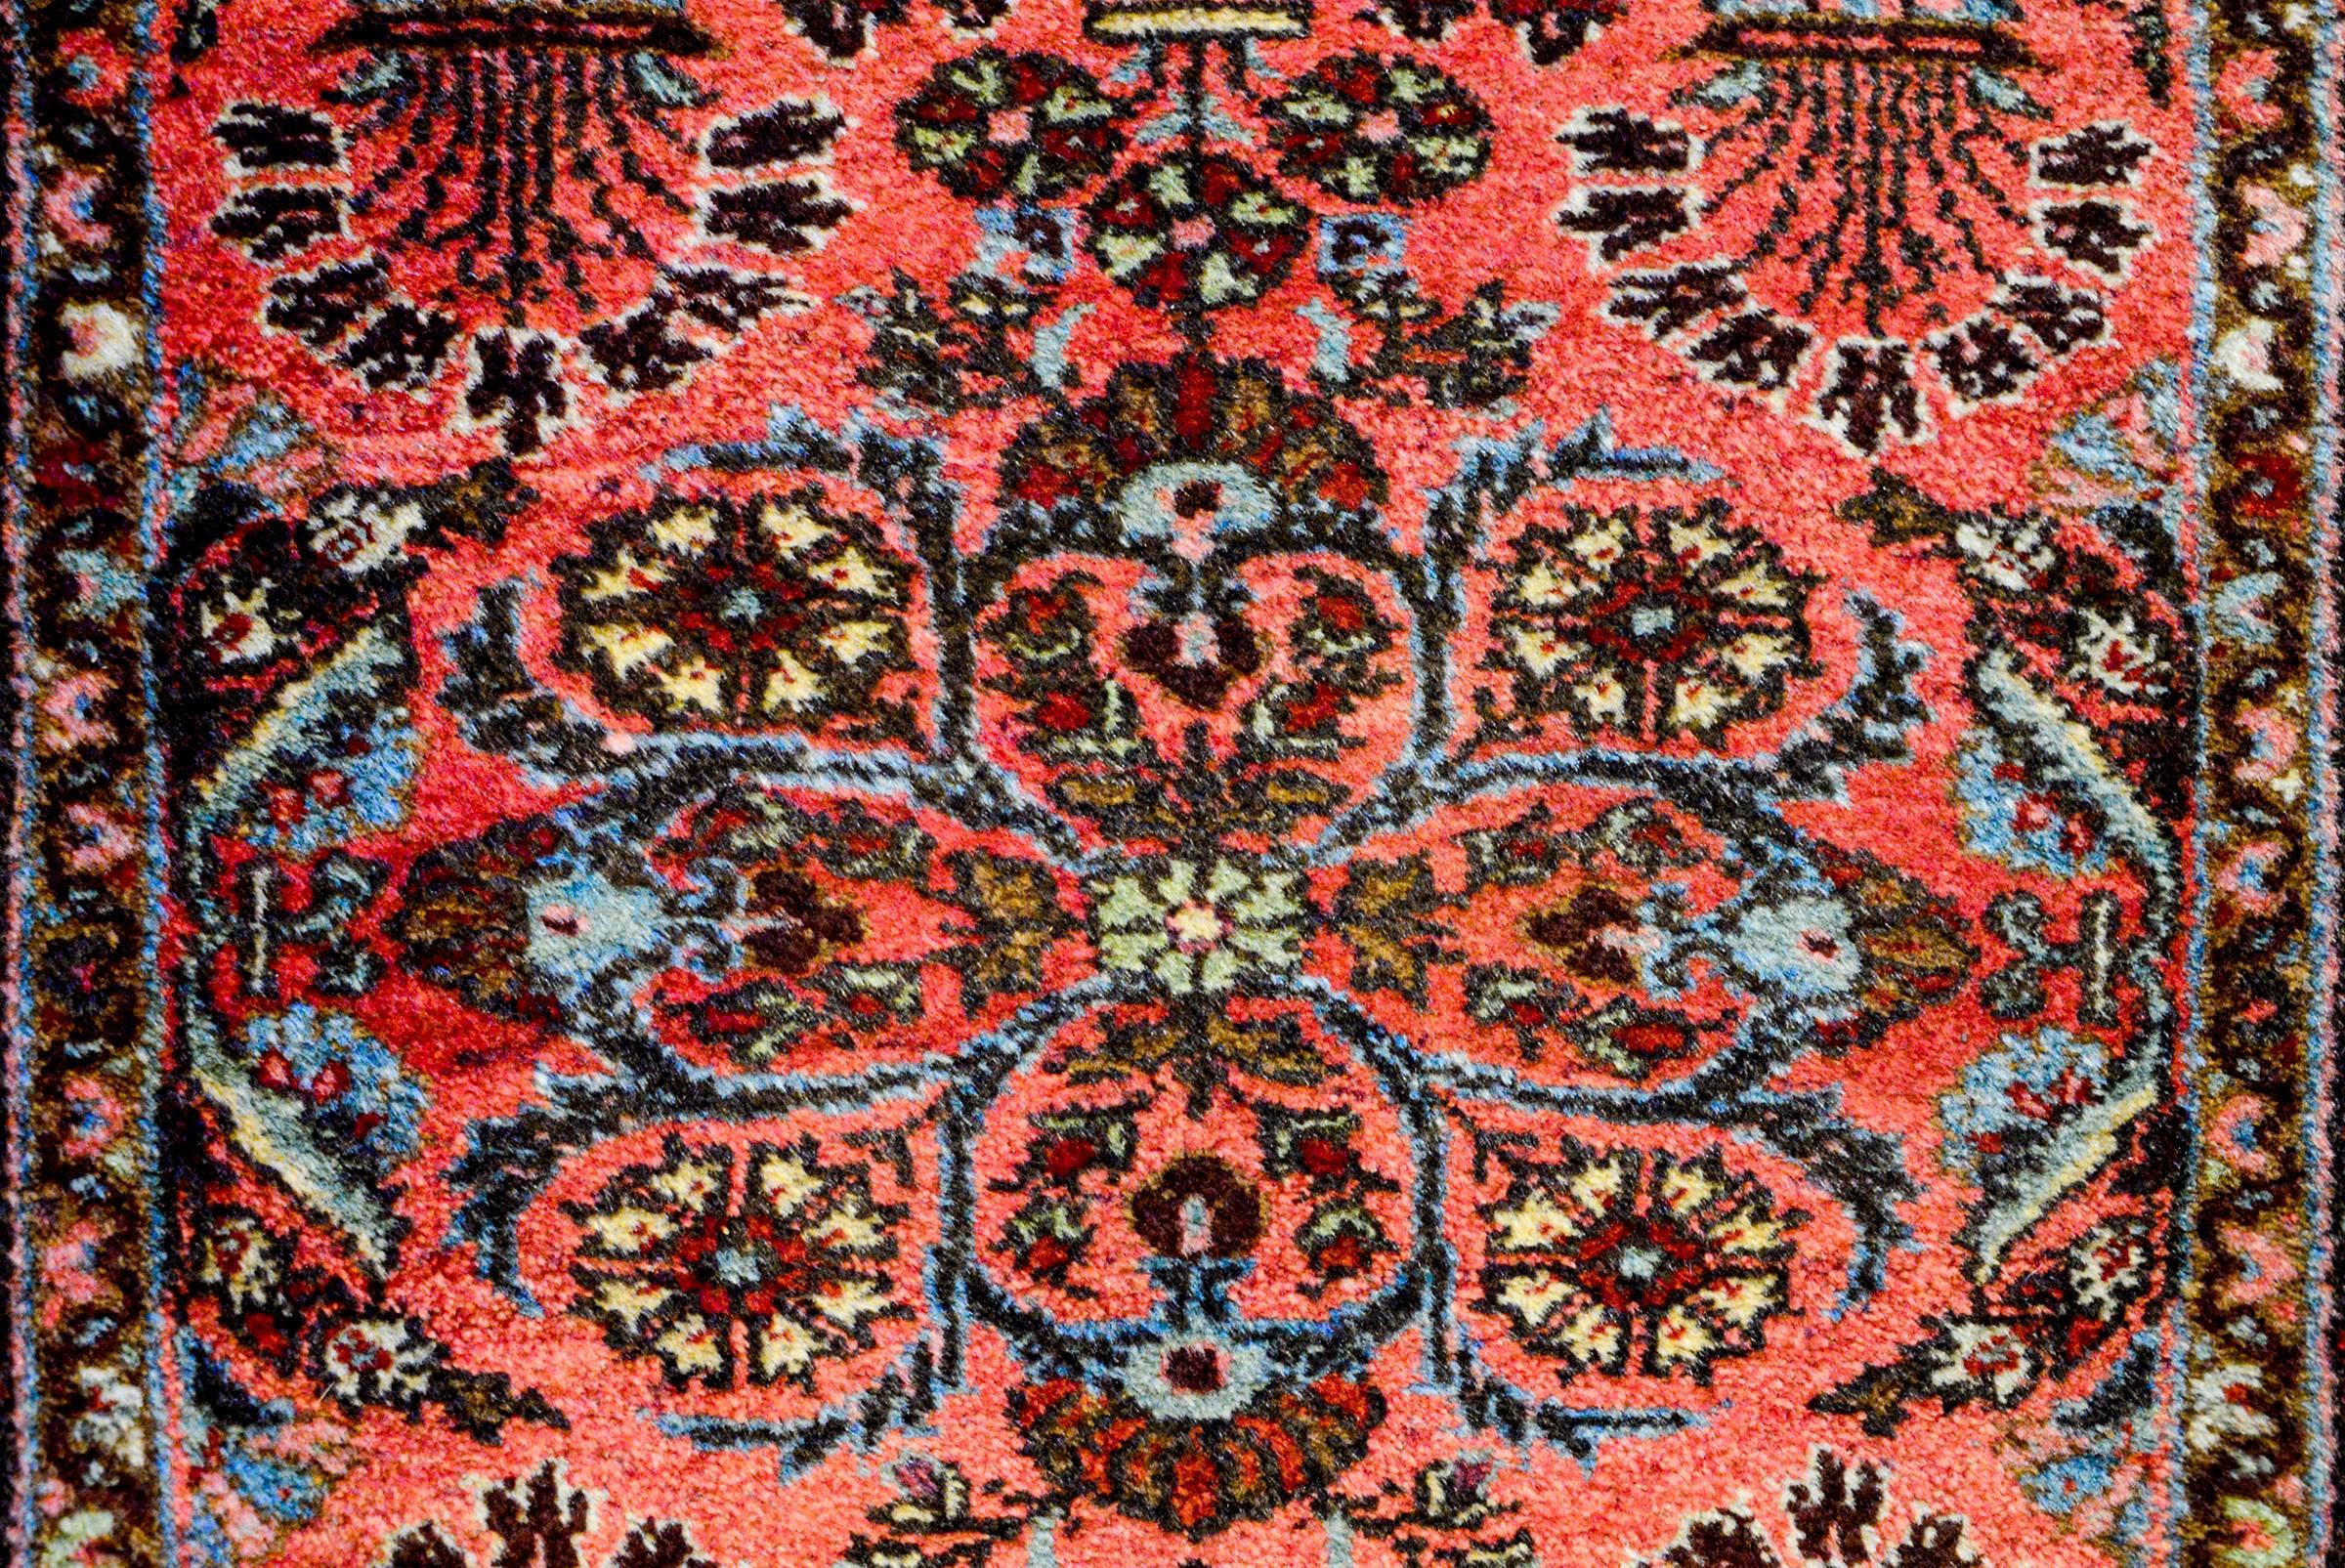 An exceptional early 20th Century Petite Lilihan rug with a traditional mirrored floral pattern woven in light and dark indigo and natural wool on a coral background. The border is complex with three distinct floral and vine patterns on a brown